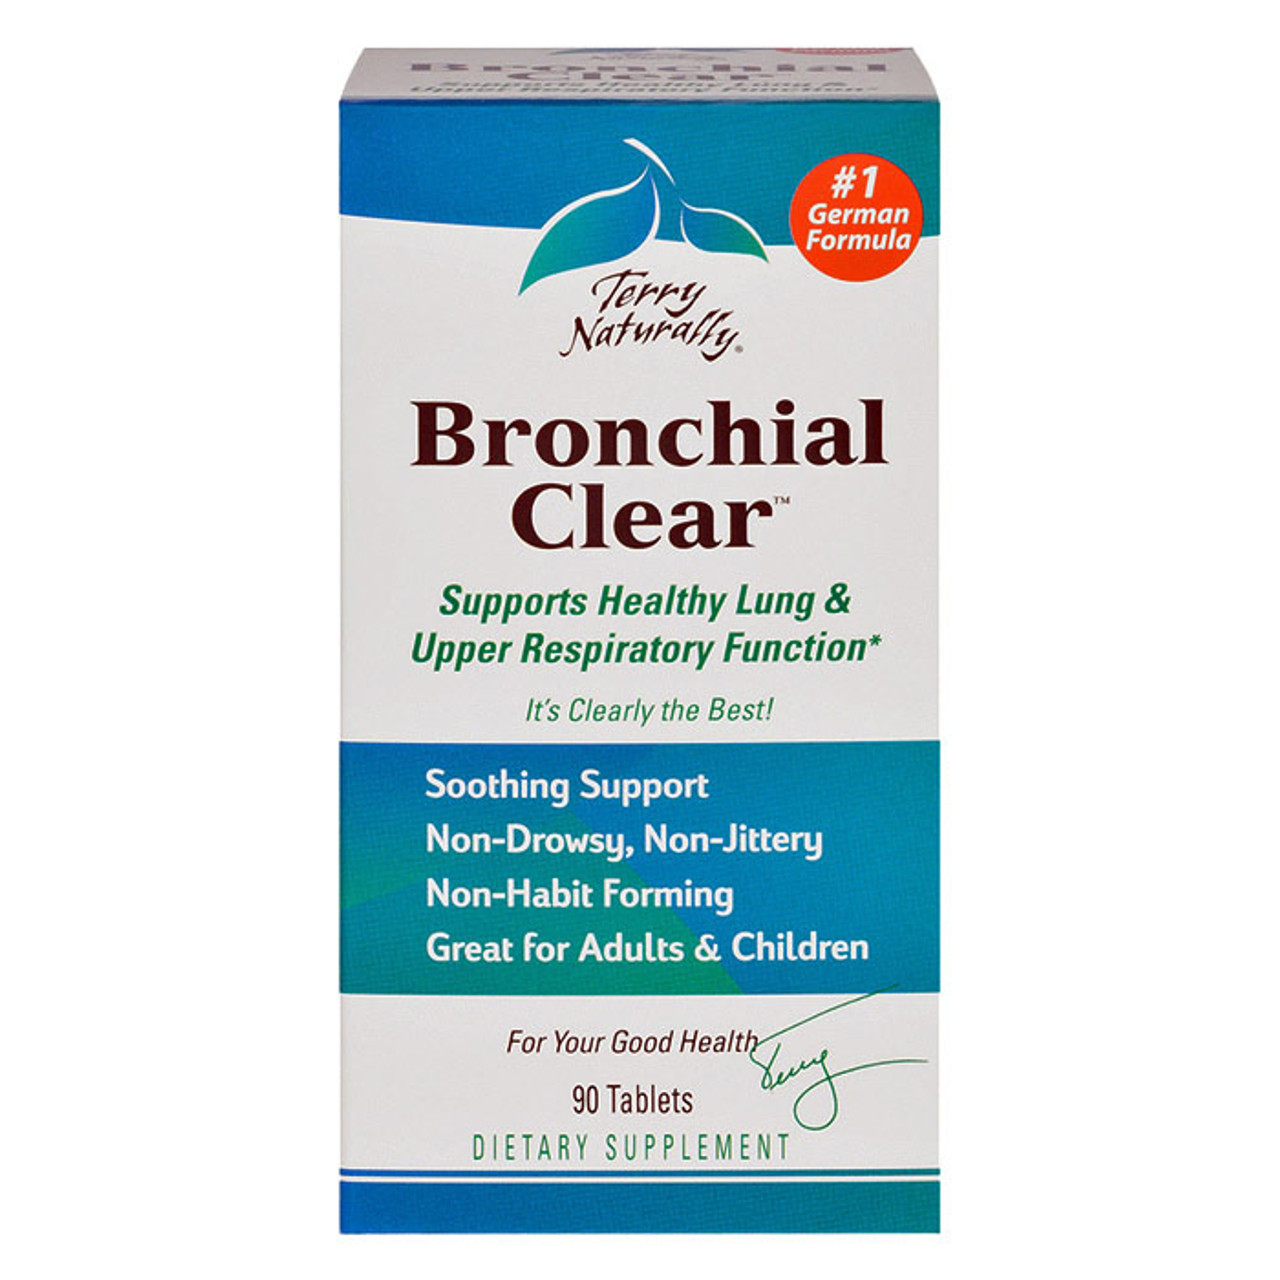 Terry Naturally Bronchial Clear